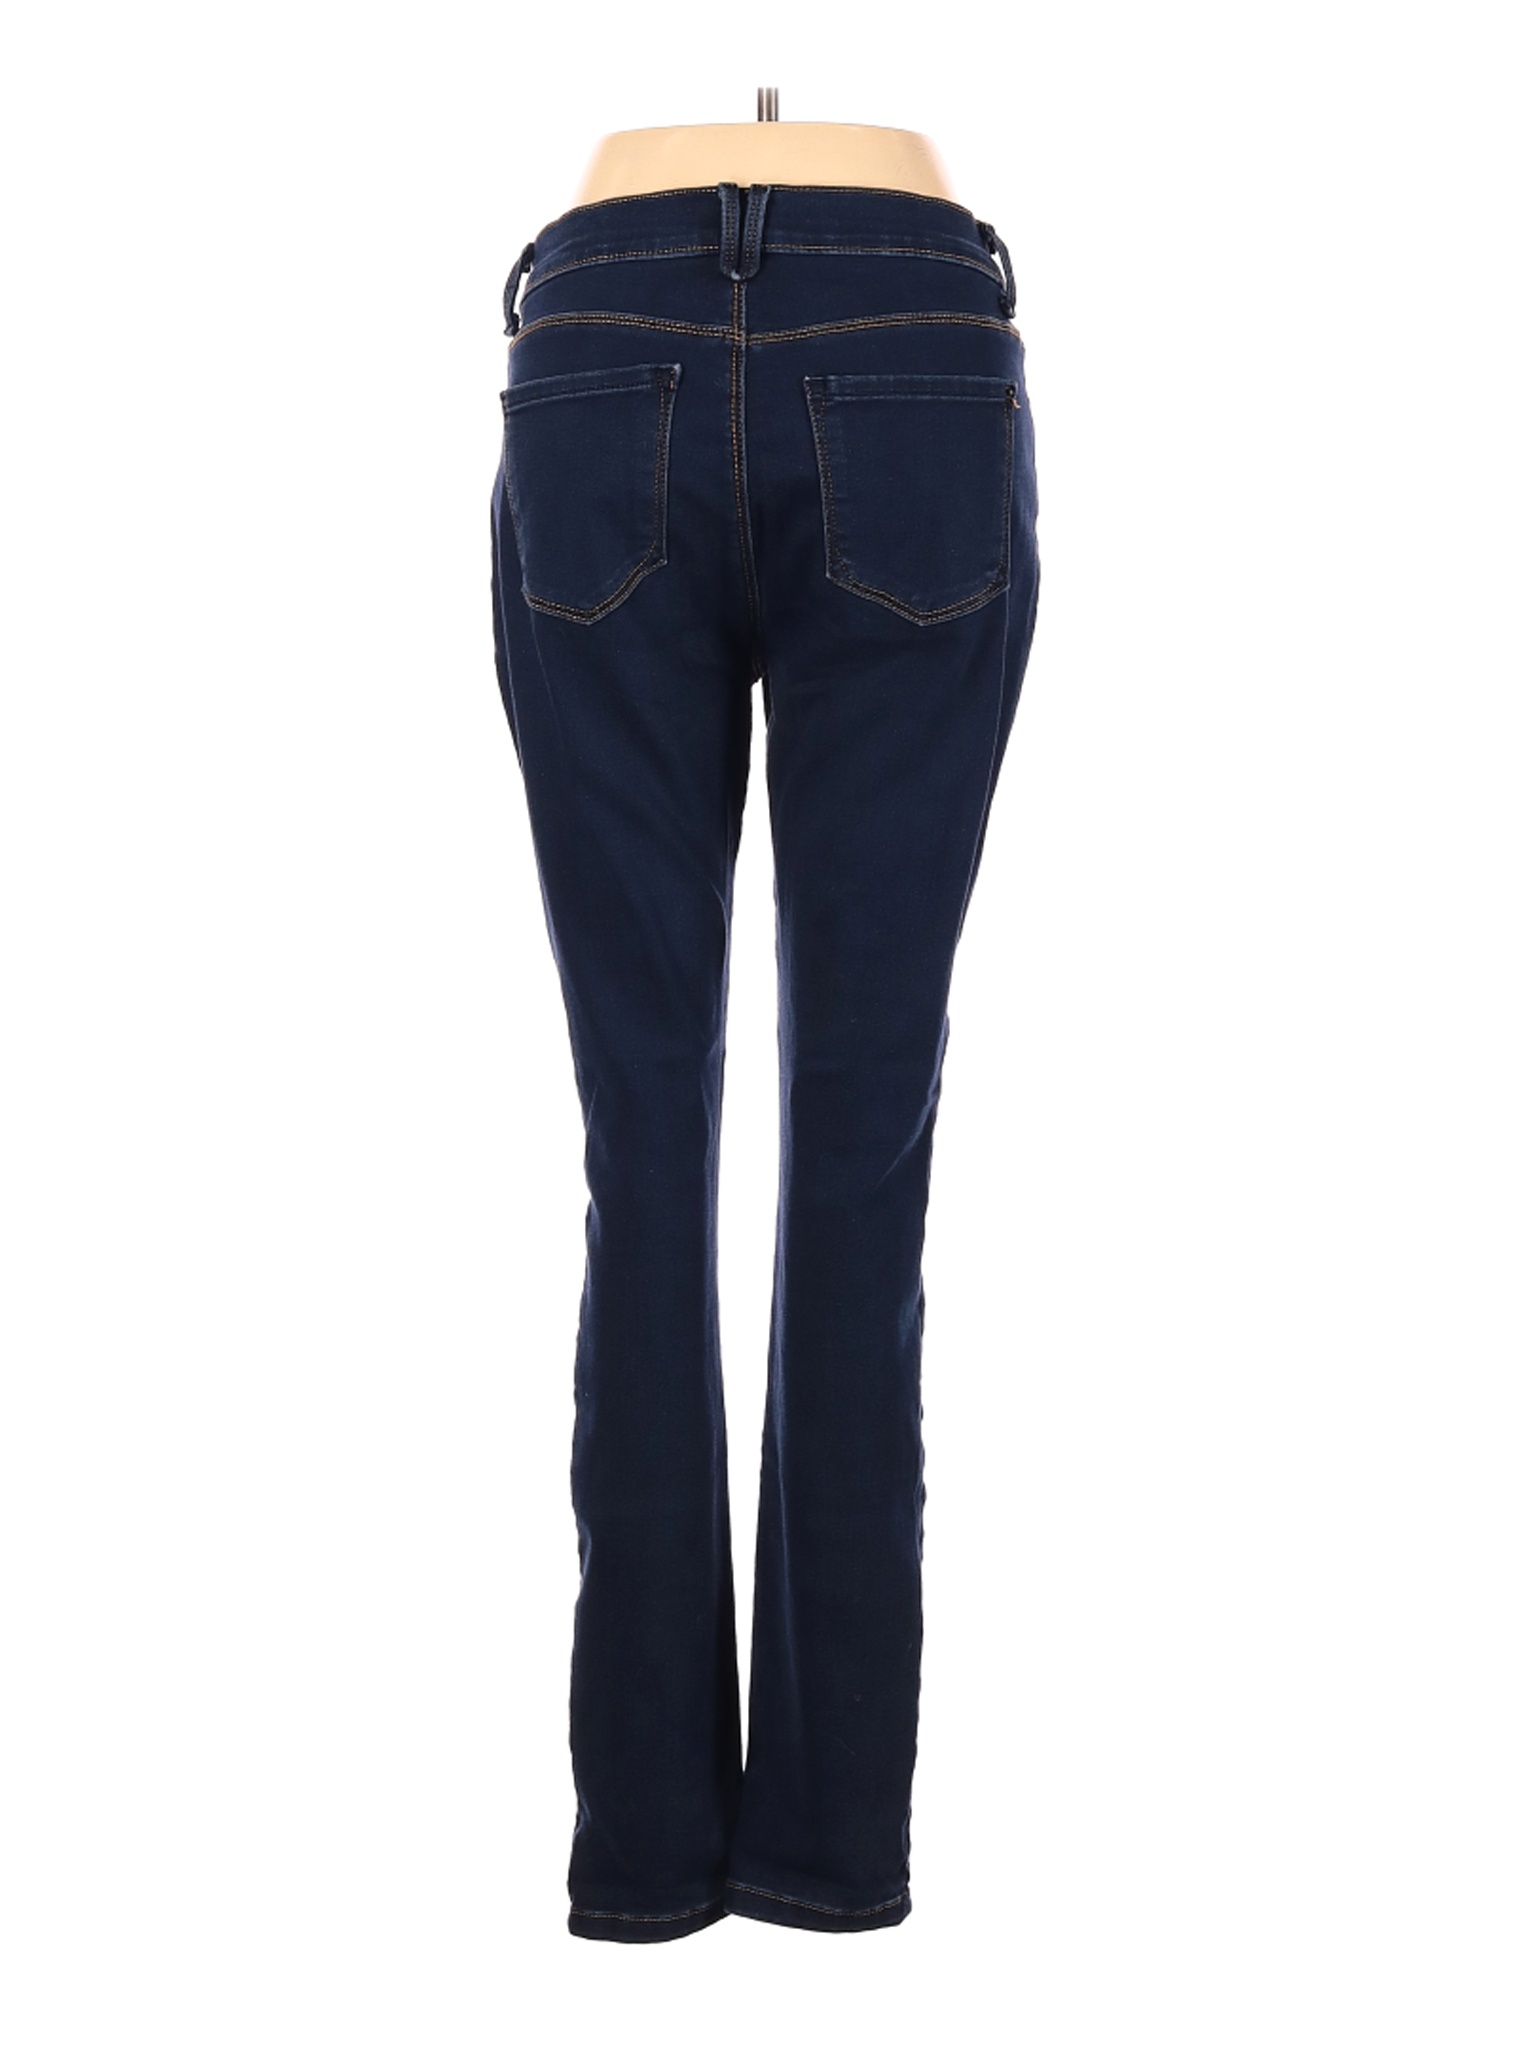 curve appeal brand jeans